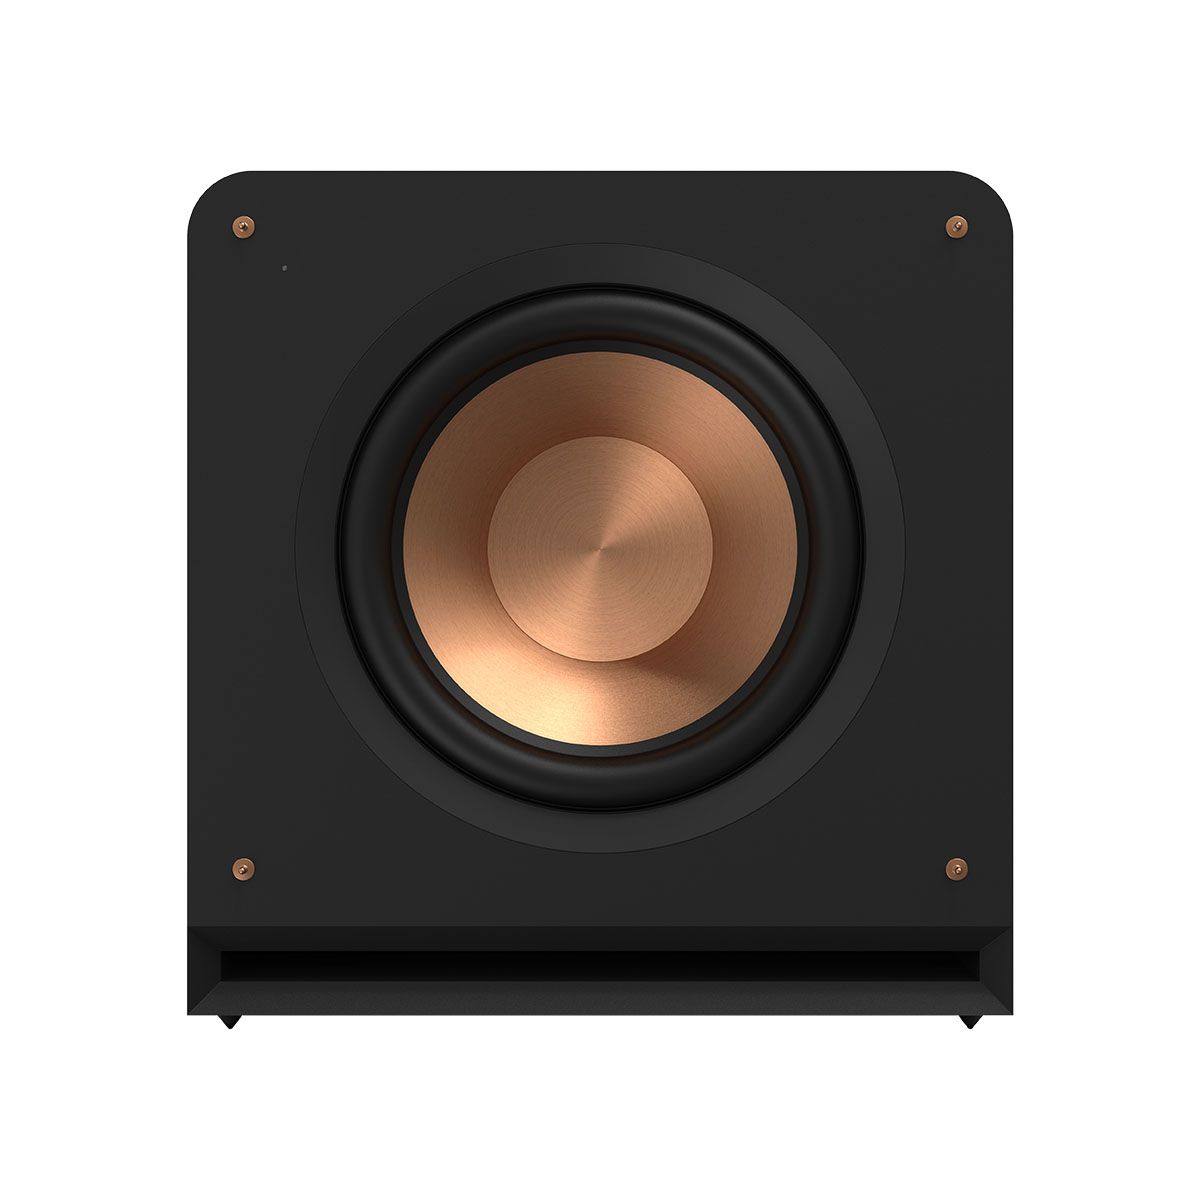 Klipsch RP-1400SW 14" Powered Subwoofer - Ebony - front view without grille